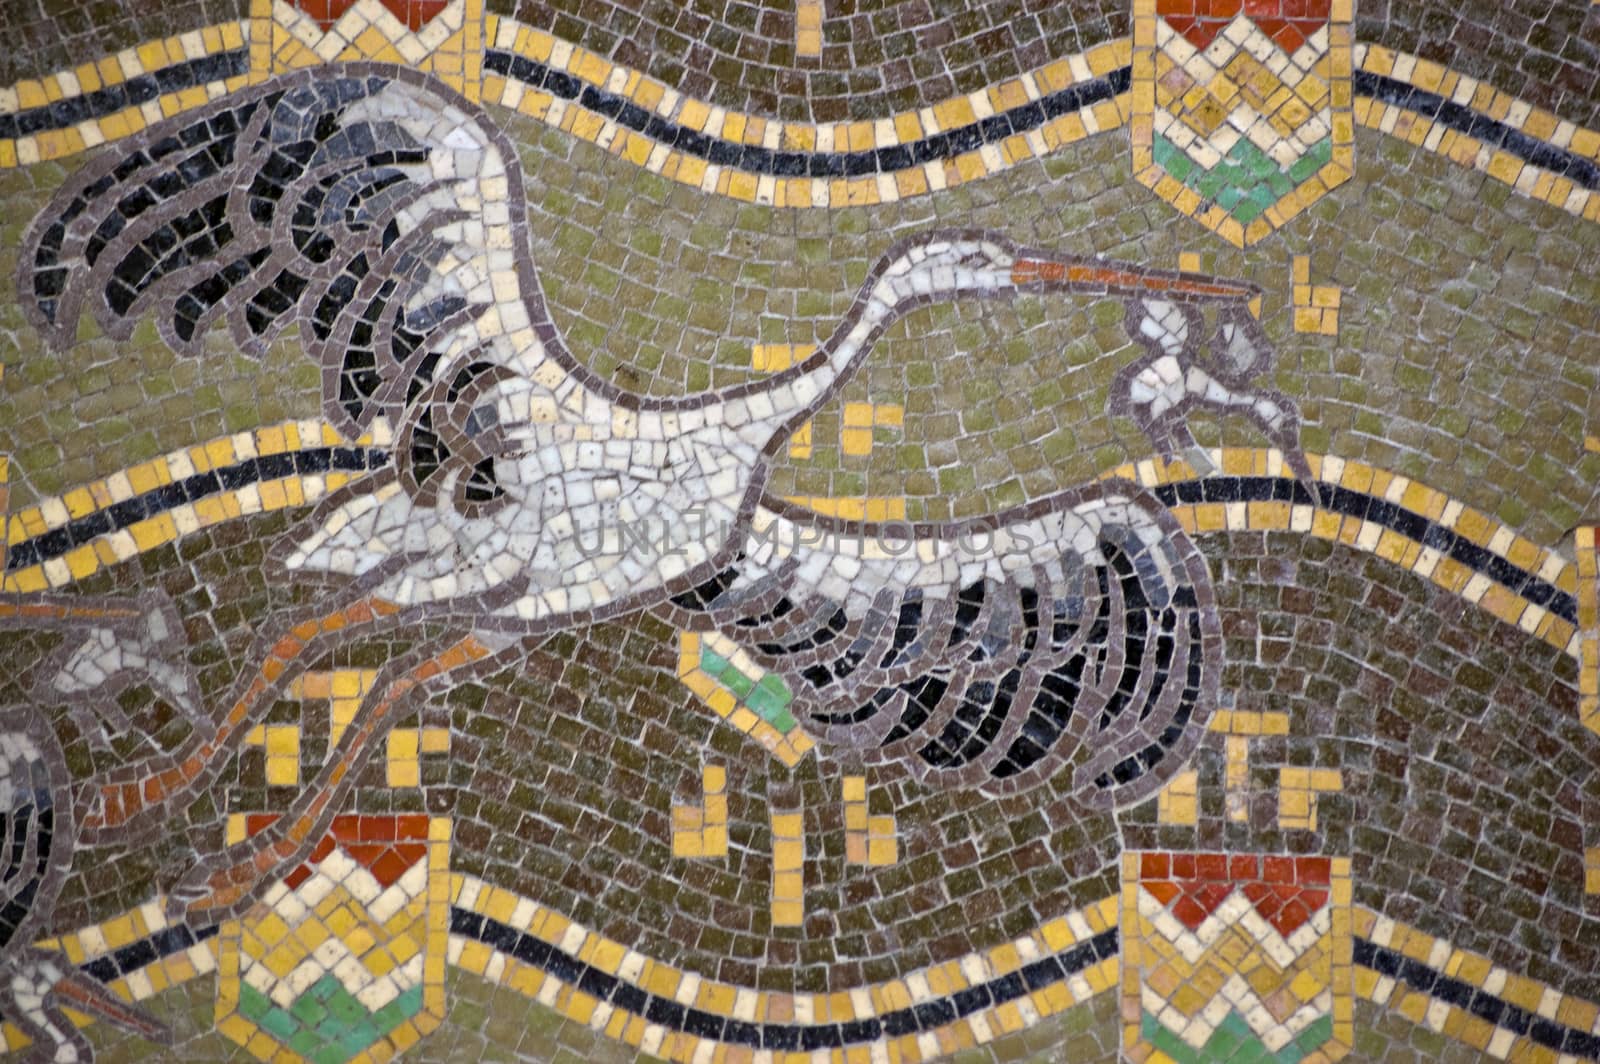 Mosaic showing white storks flying. Latin name for the bird is Ciconia ciconia. Outside wall of the Hungarian Pavilion, Giardini, Venice. Building open to the public to exhibit during the Biennale.